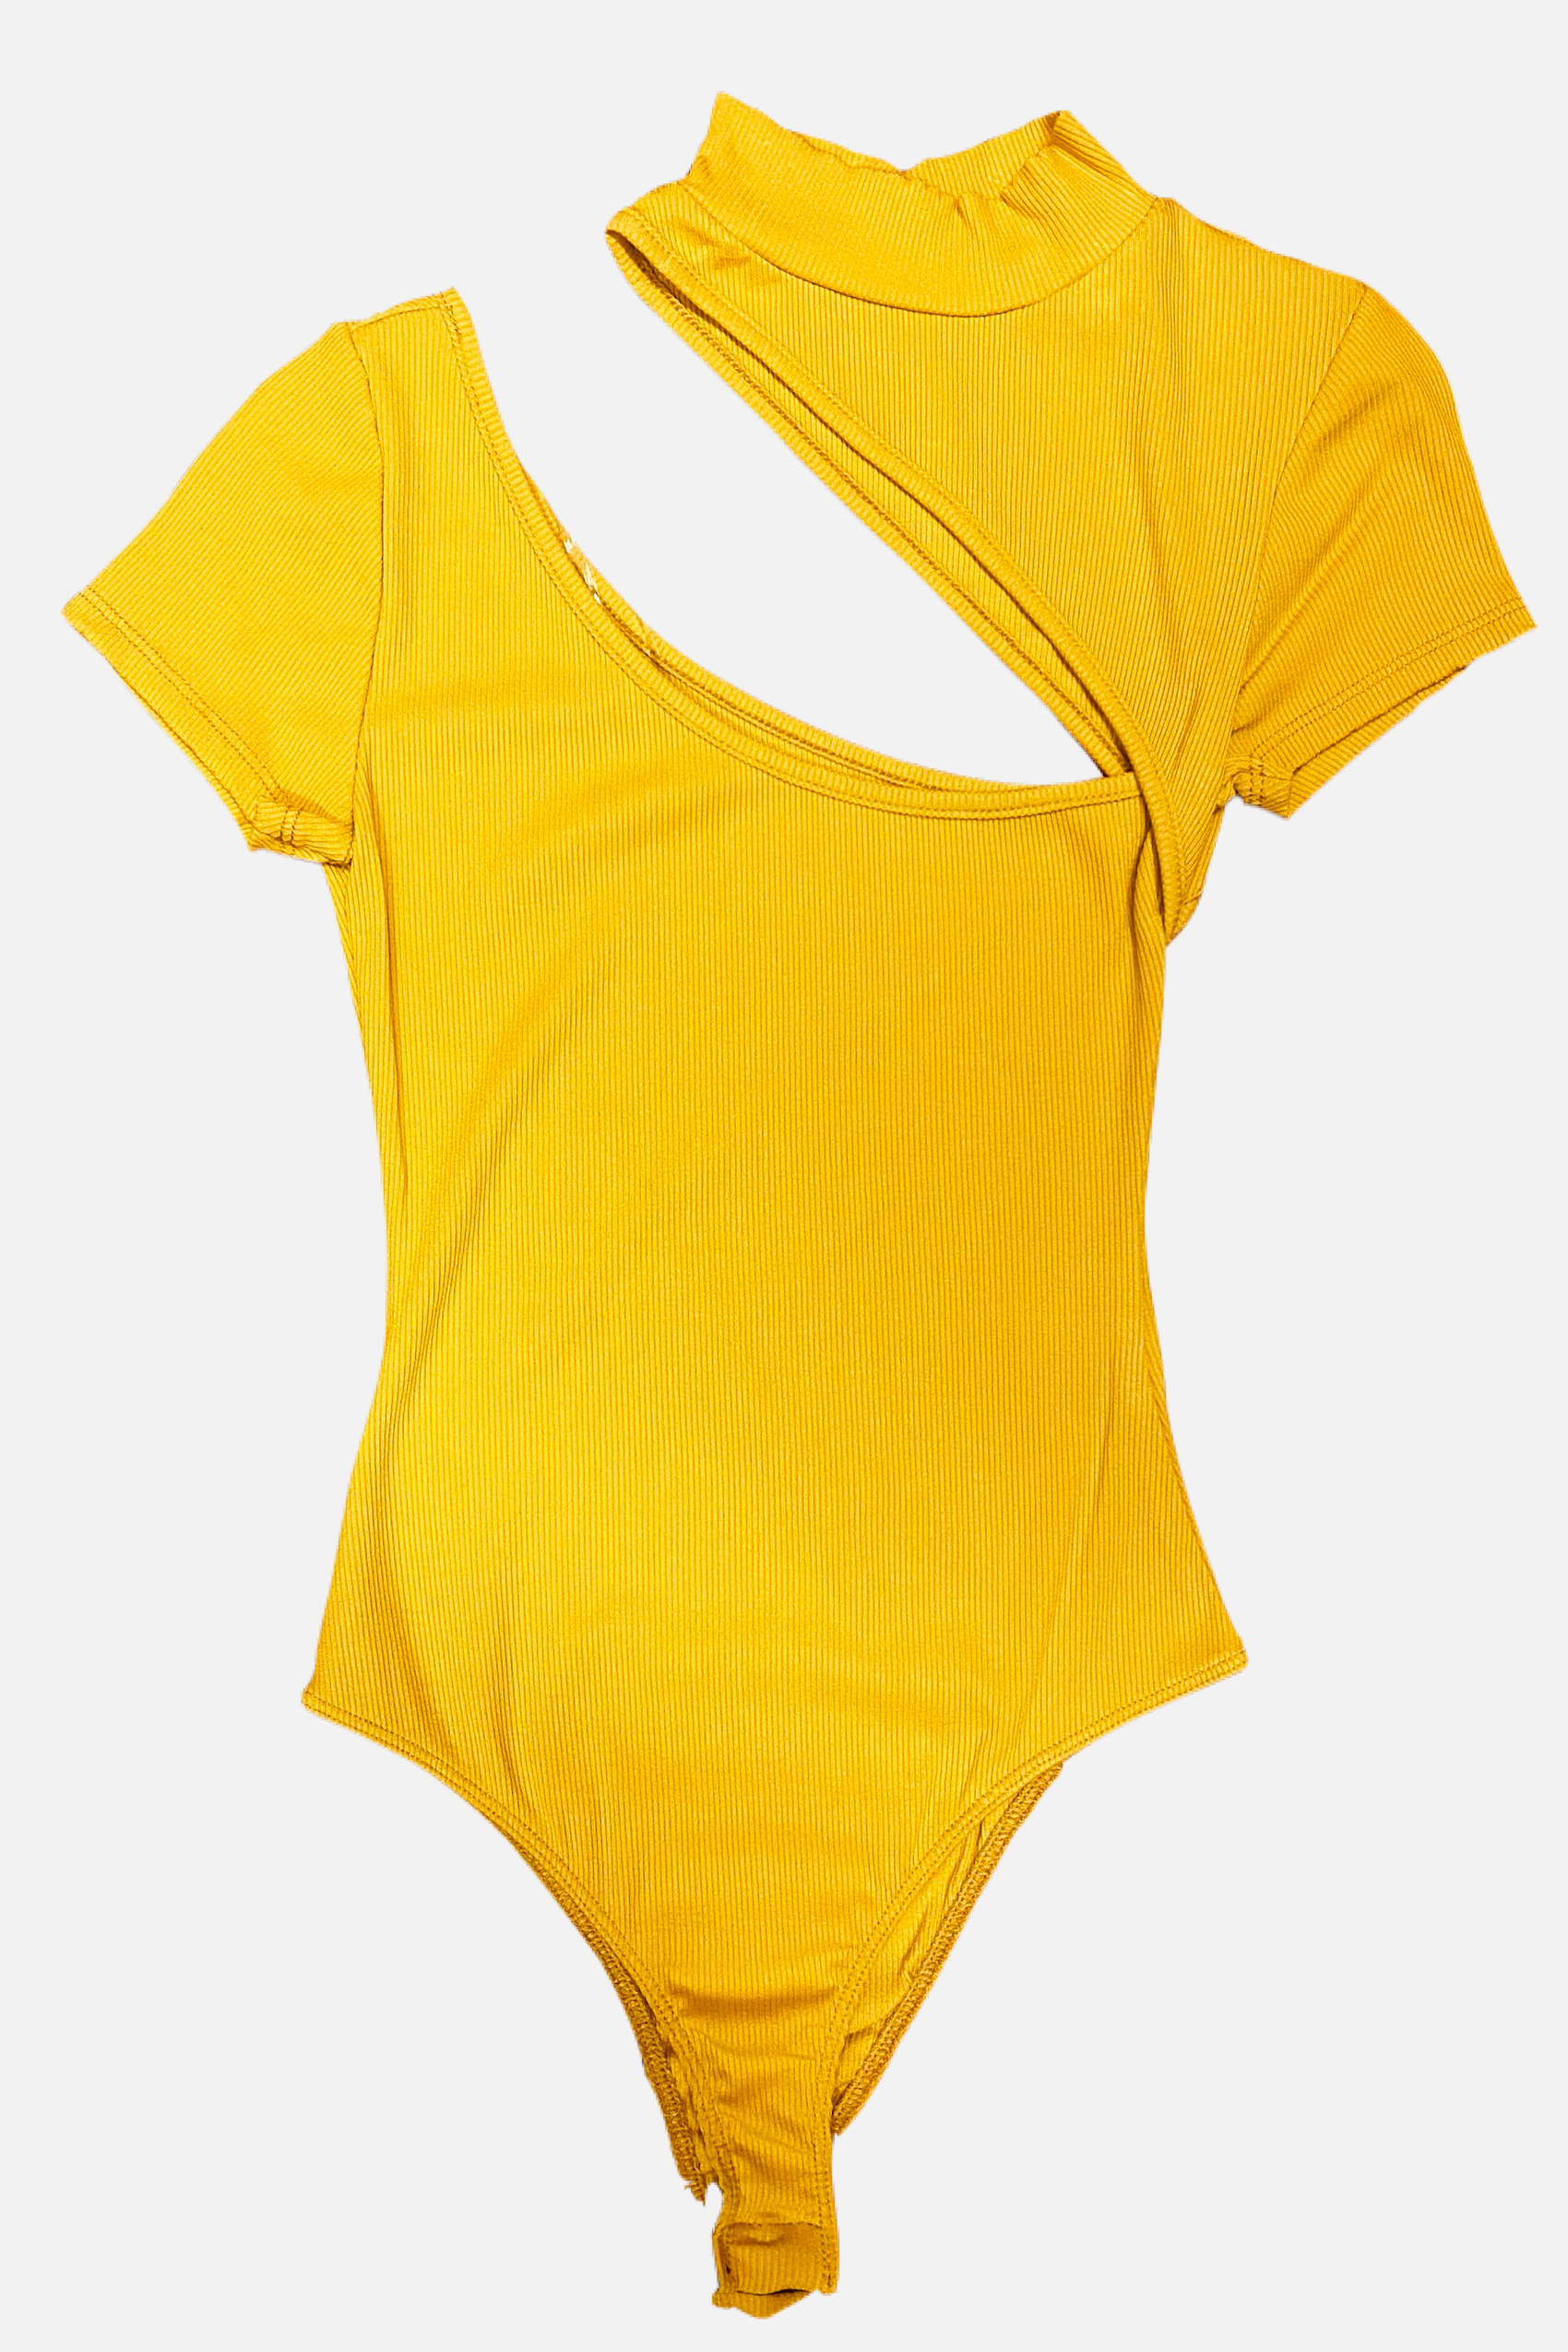 REMI x REVOLVE Margo Cut Out Bodysuit in Peach. - size 4X (also in 3X) -  Yahoo Shopping